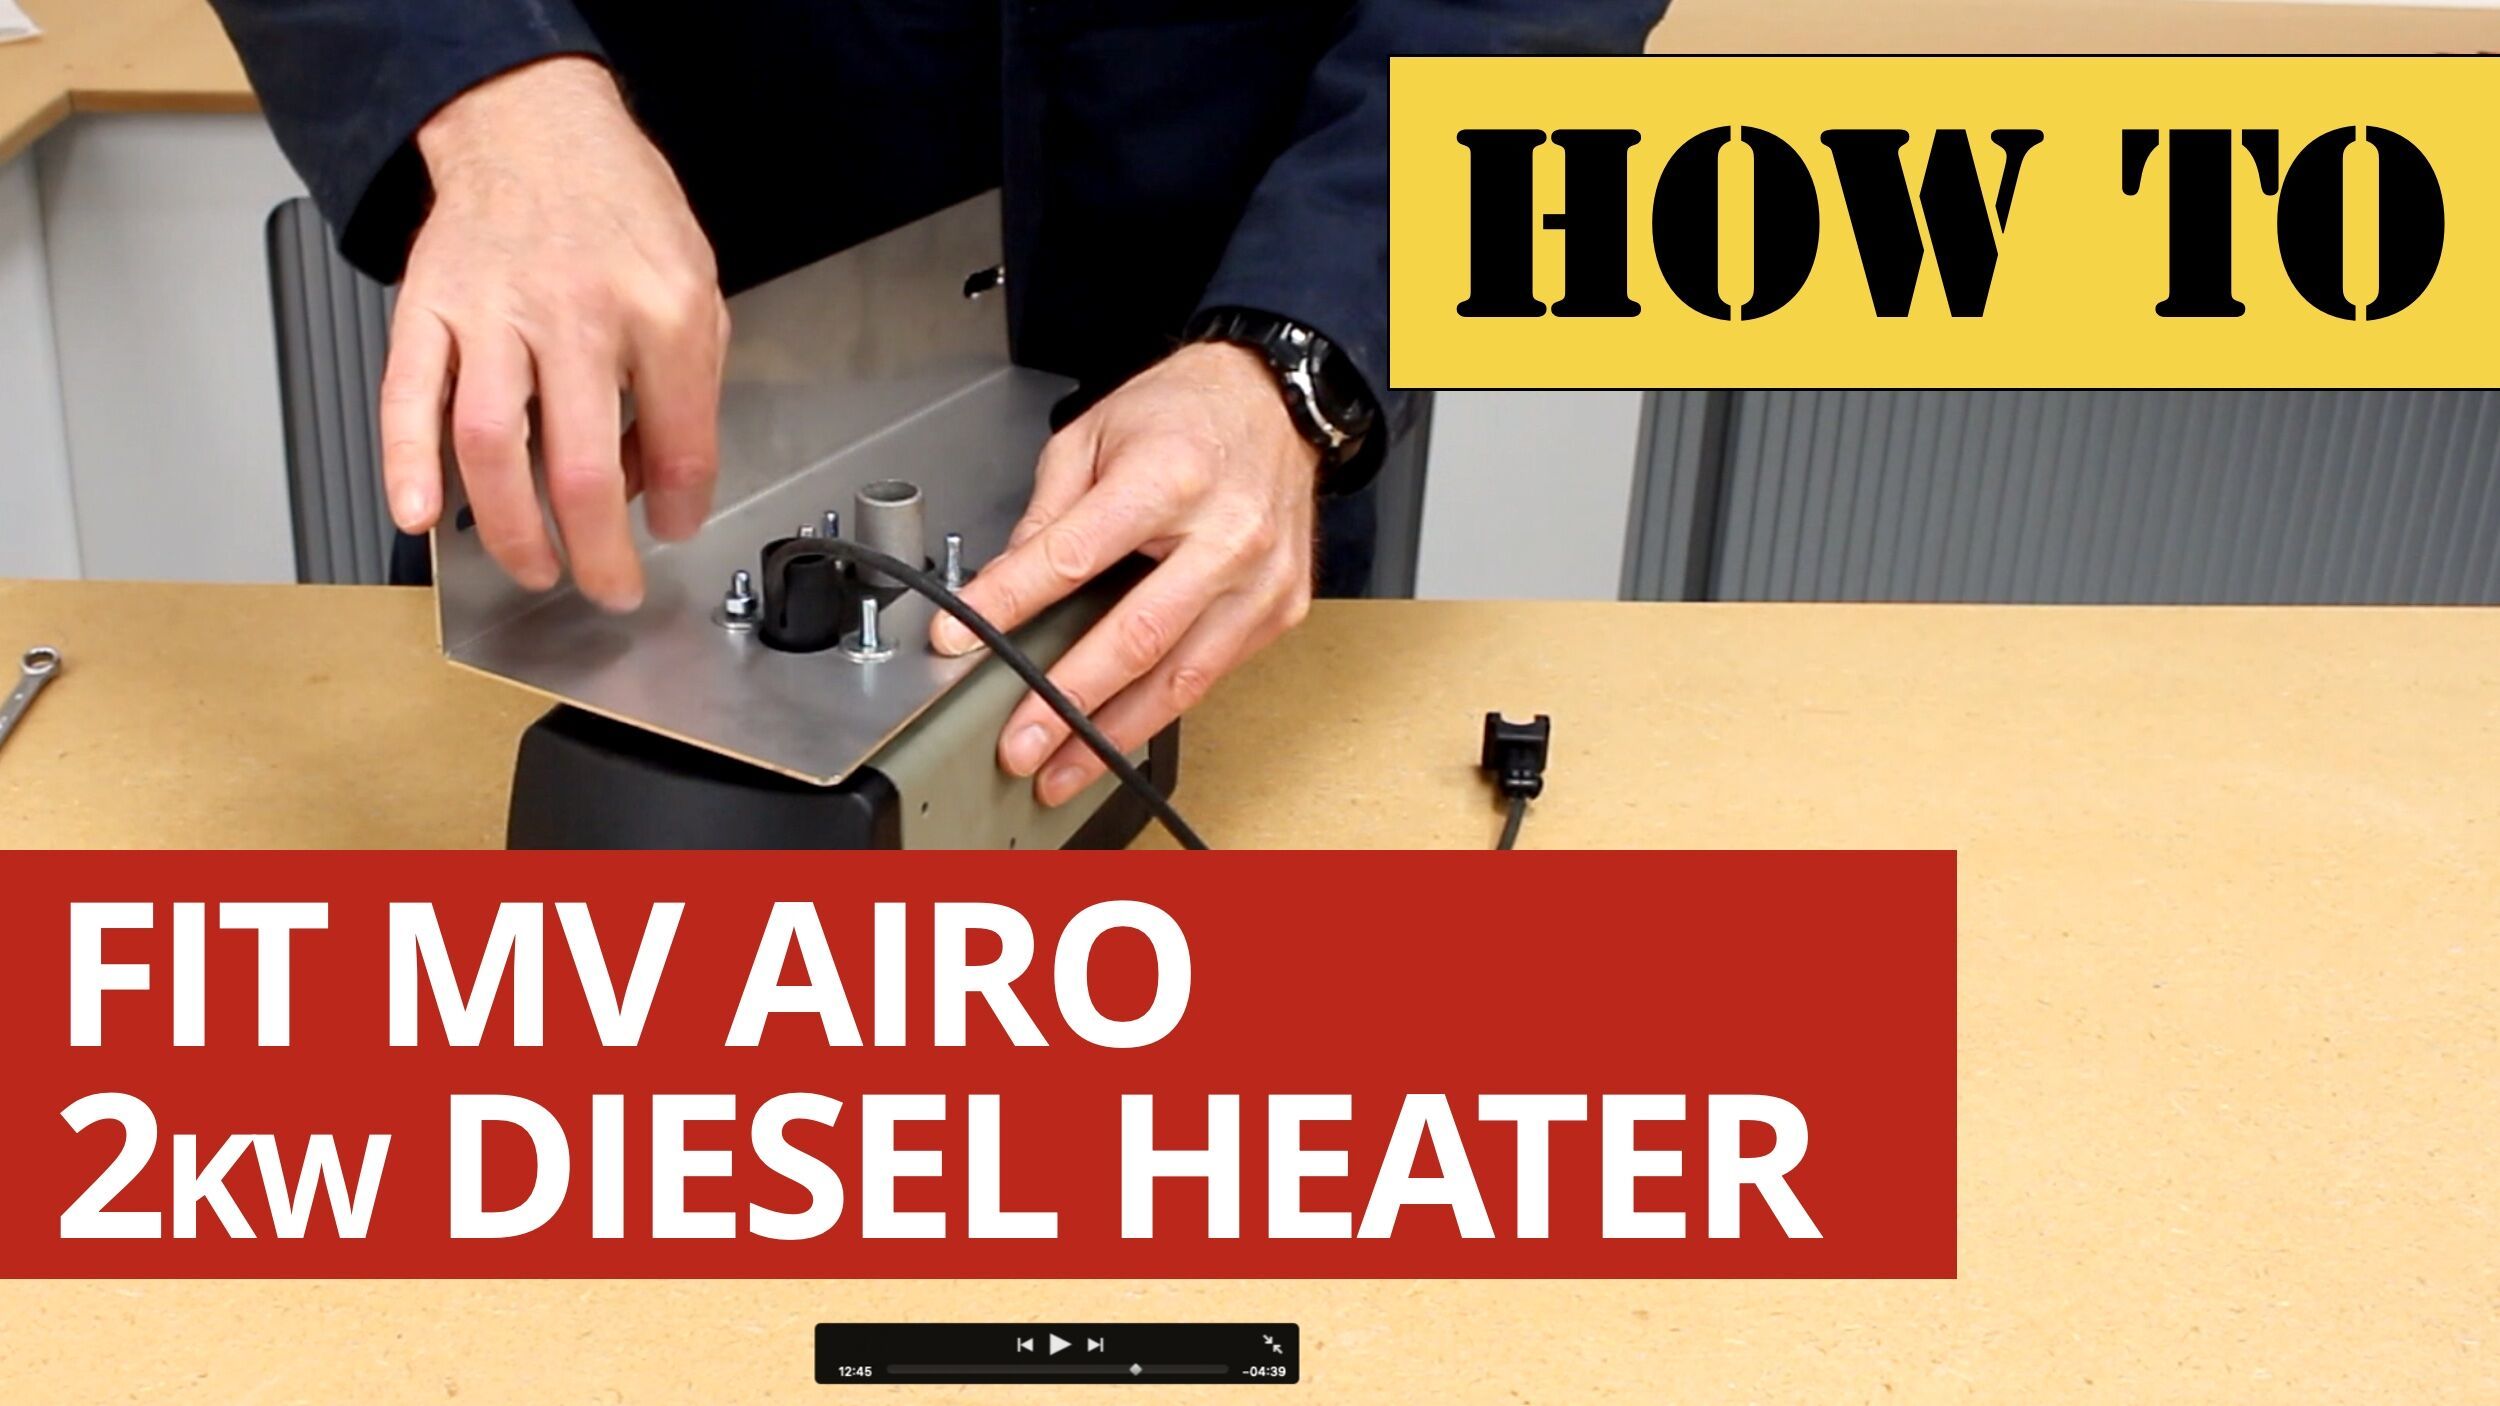 Video: How to fit the Mikuni MV Airo 2kw Diesel Heater